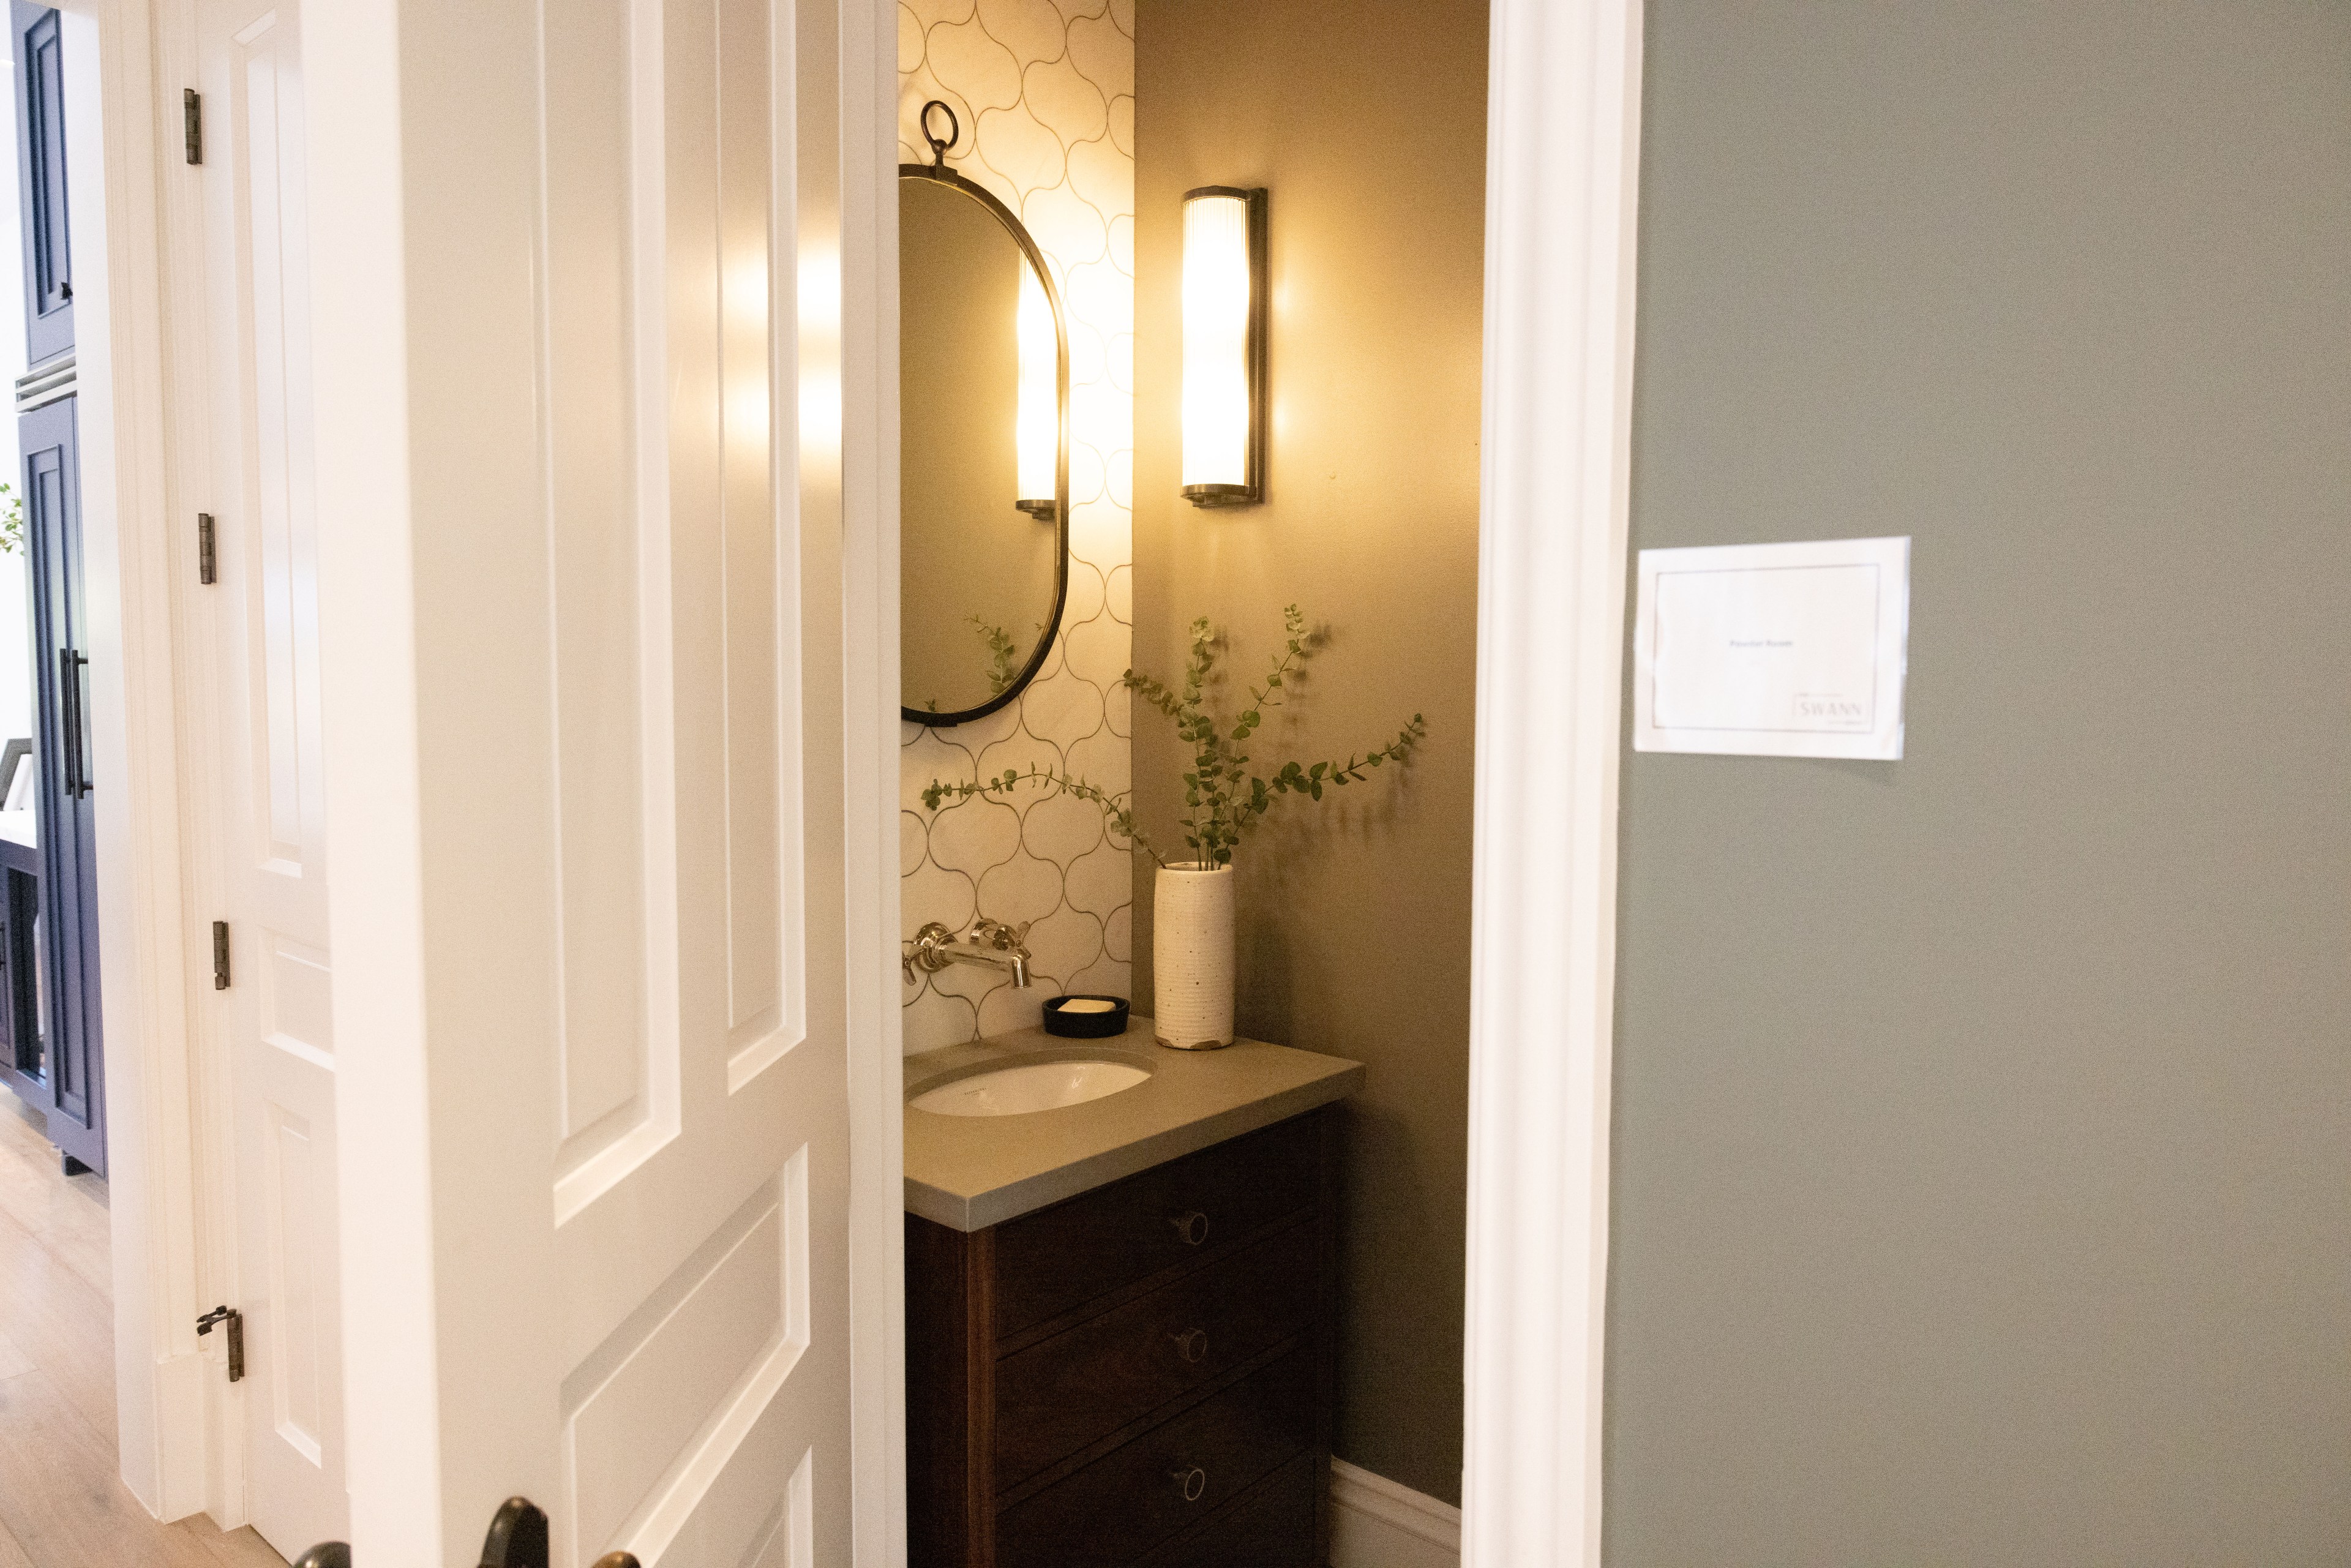 The image shows a small bathroom with a vanity, round mirror, wall sconce, and modern decor, including a vase with greenery, visible through a white door.